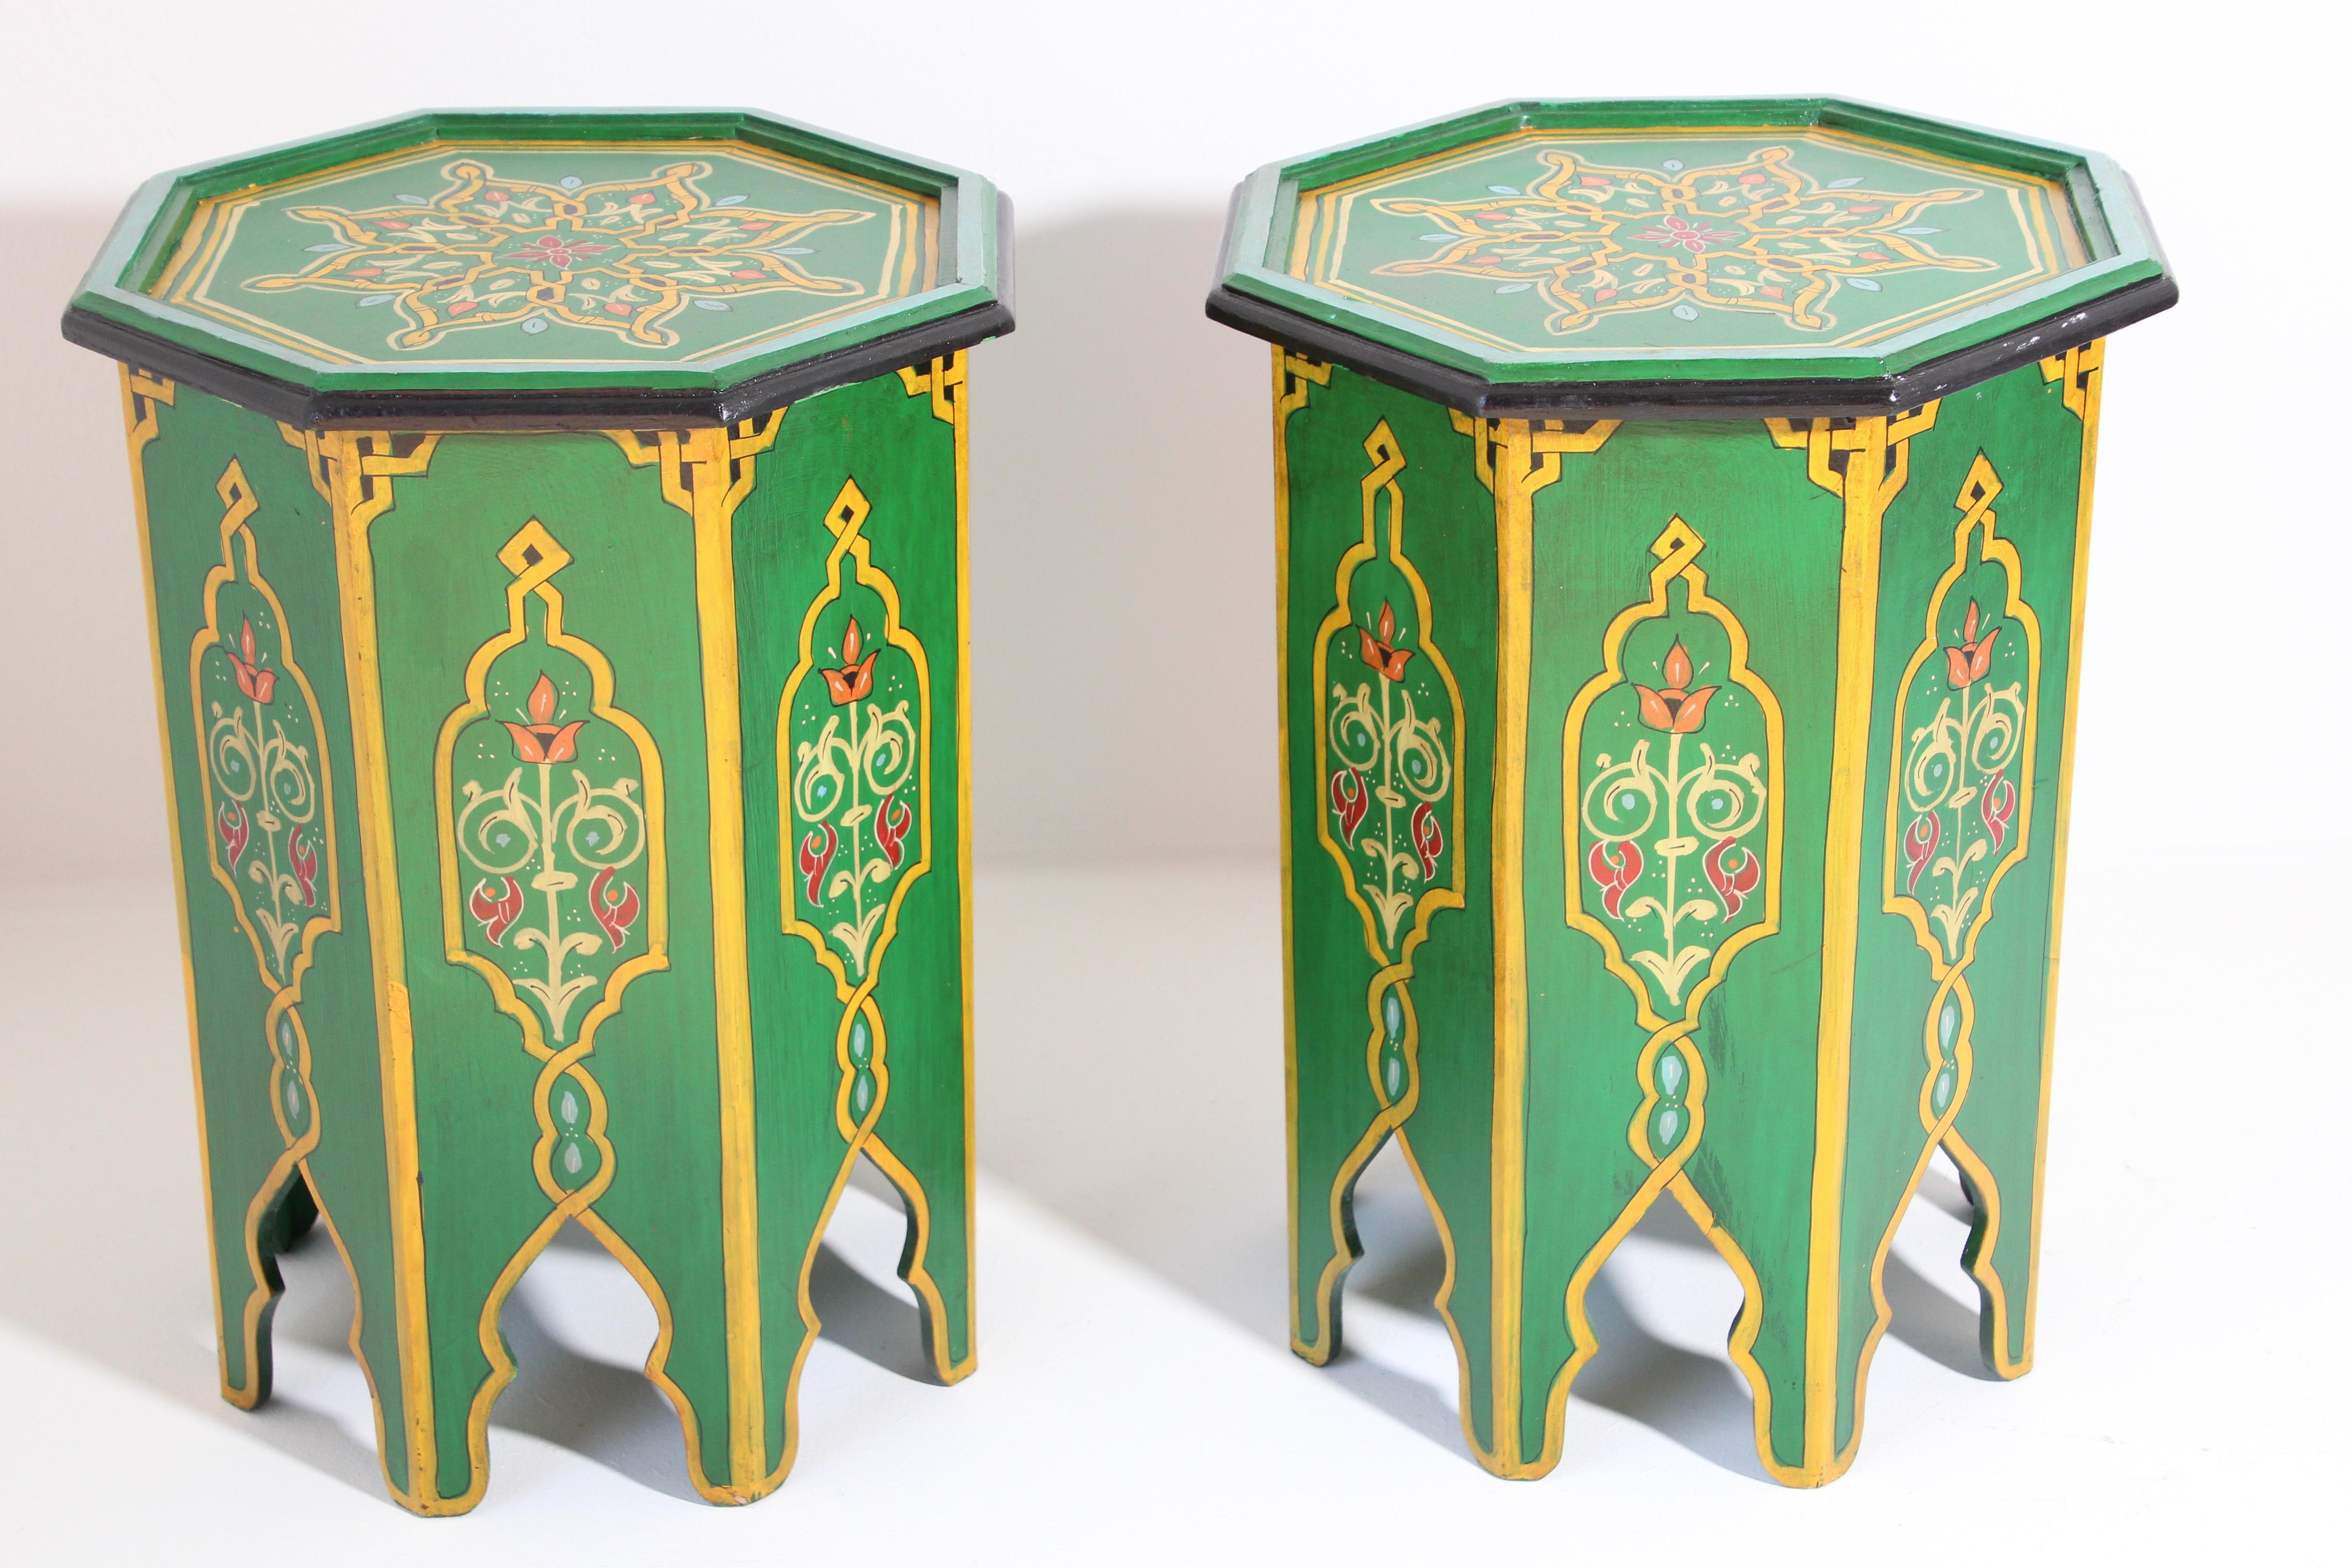 Hand-Crafted Pair of Green Moroccan Hand Painted Pedestal Tables